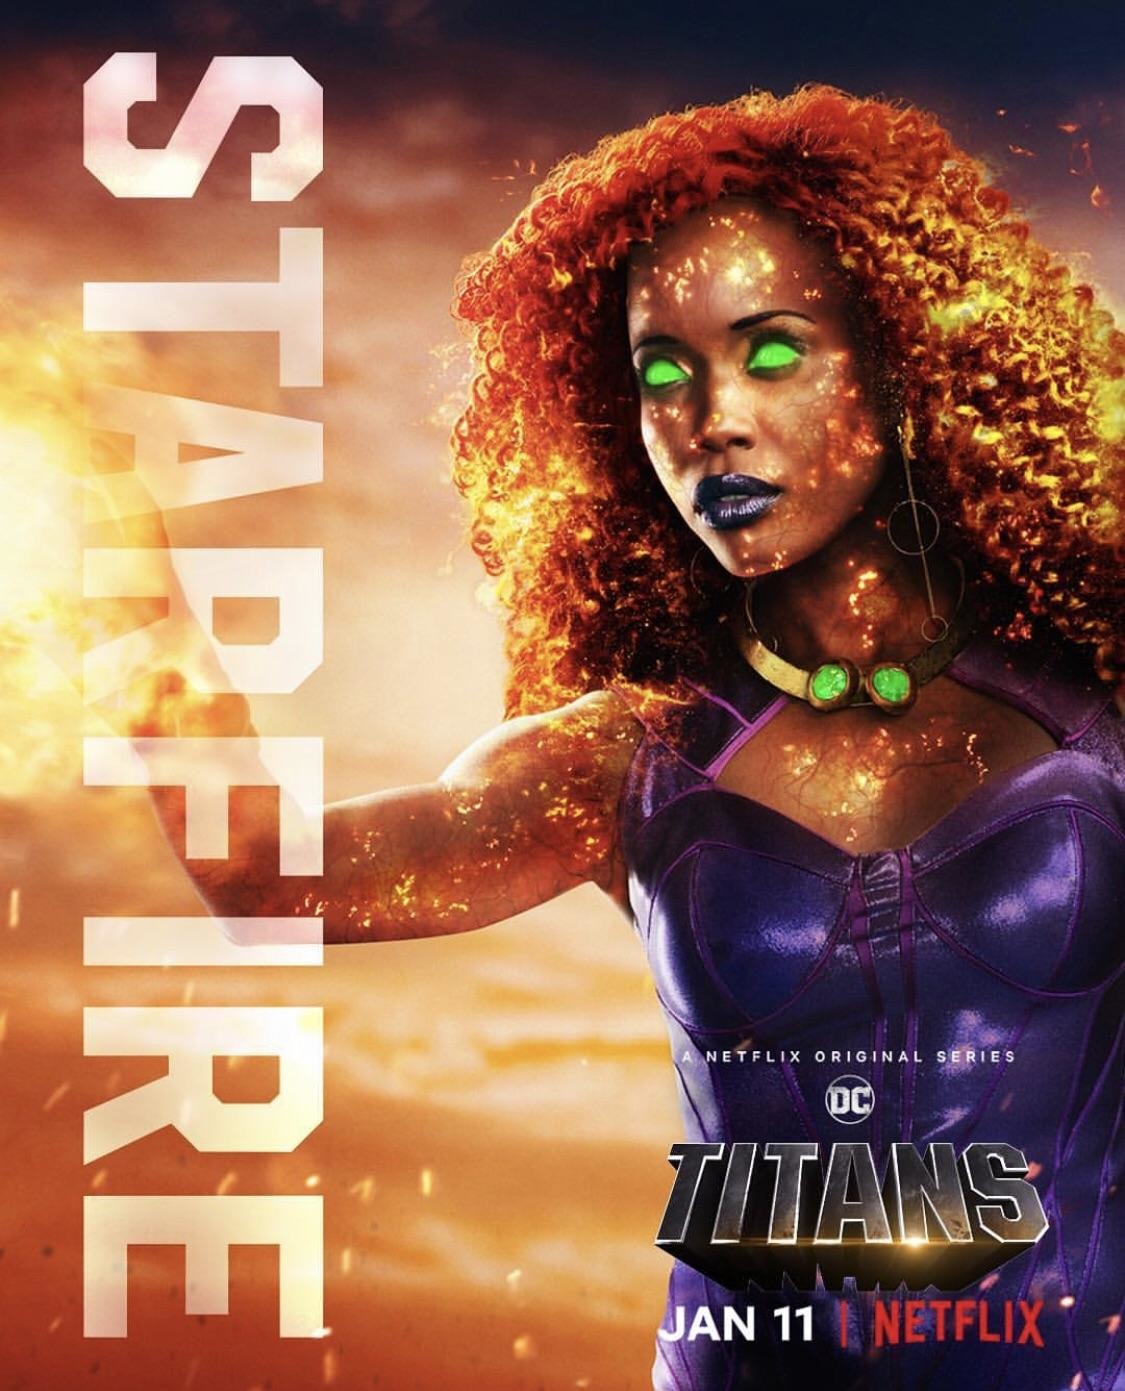 Extra Large TV Poster Image for Titans (#8 of 19)